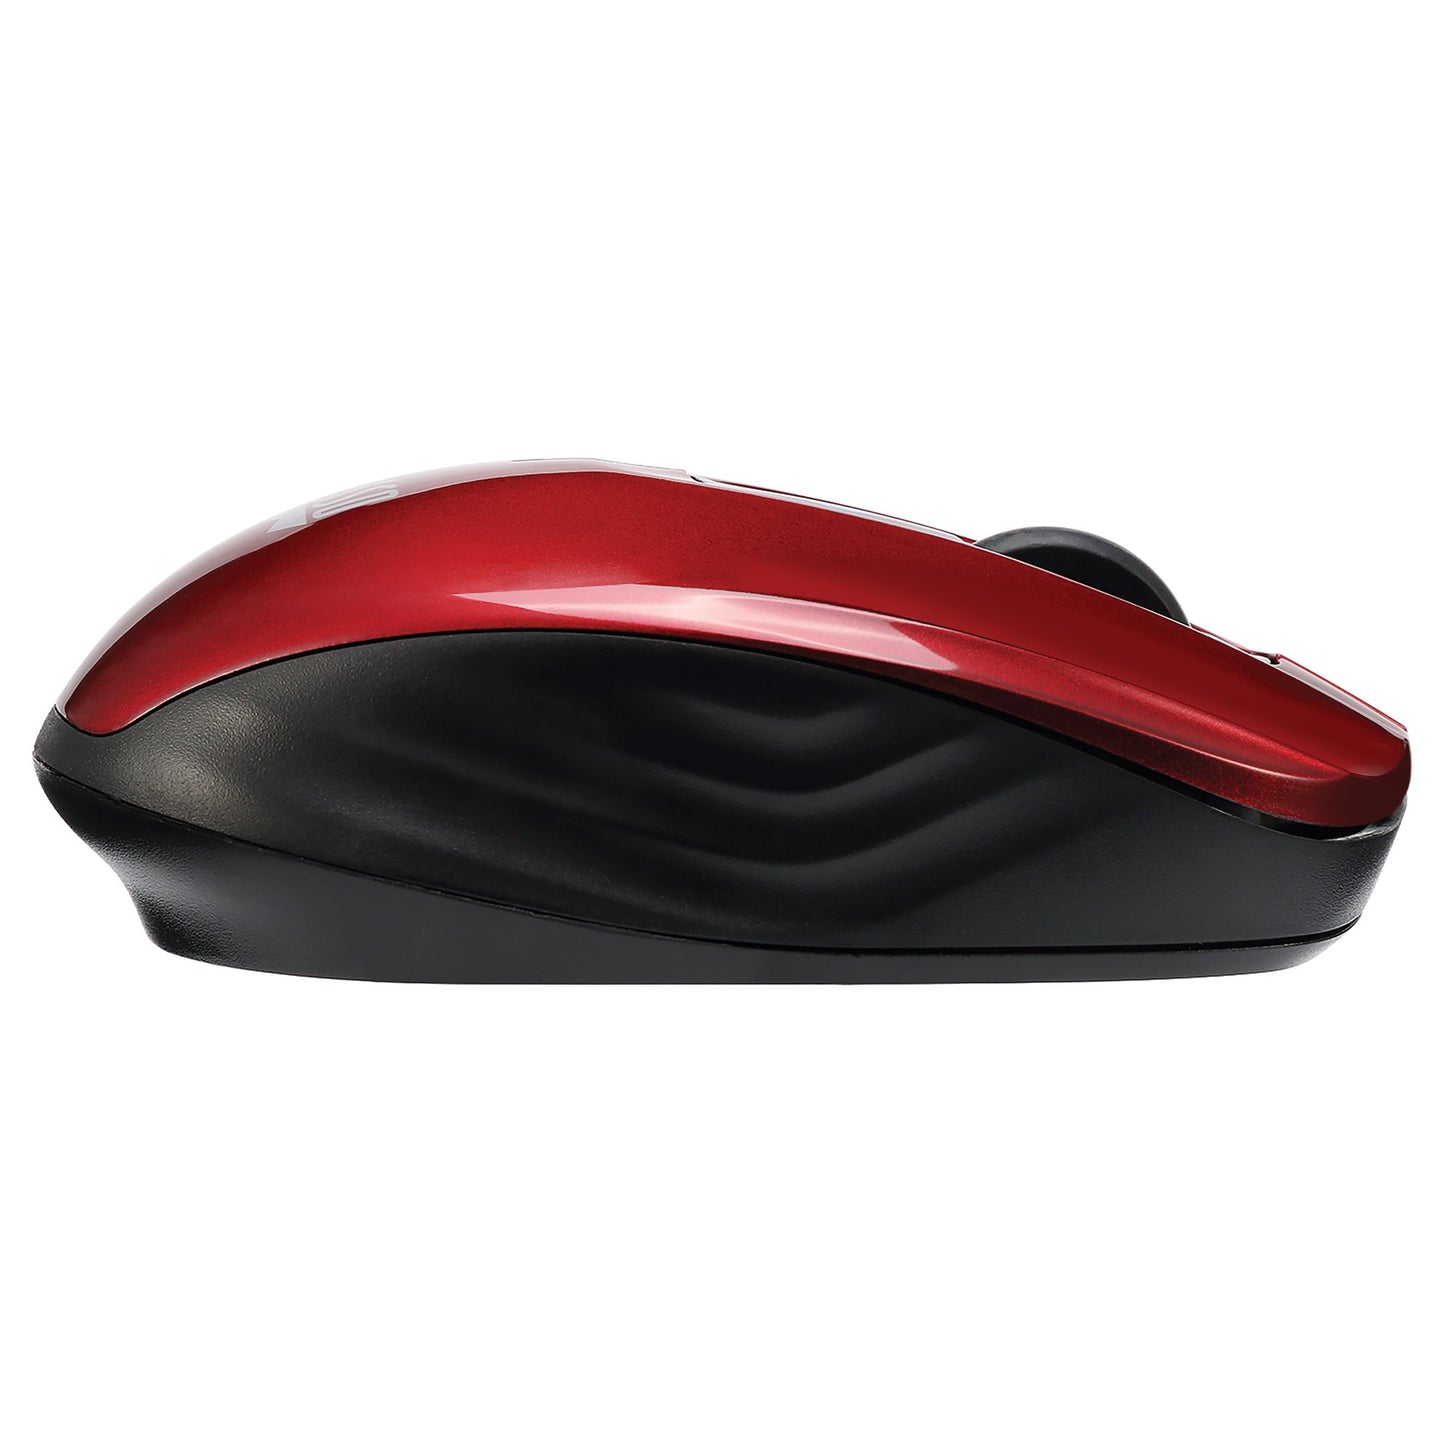 Adesso IMOUSE S50R iMouse S50 2.4 GHz Wireless Mini Mouse (Red)